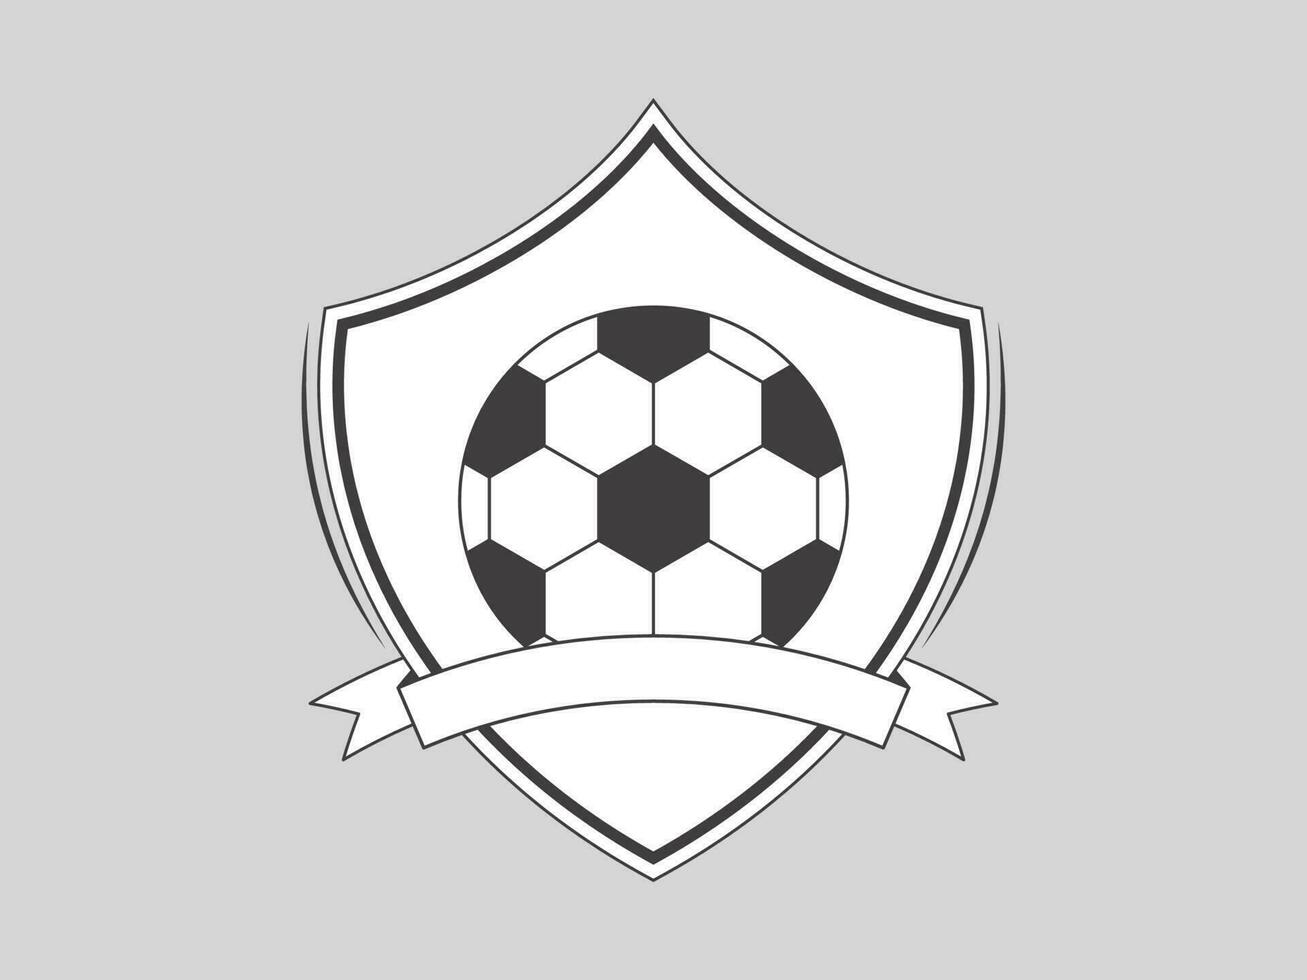 Doodle Soccer Shield Label On Gray Background. vector